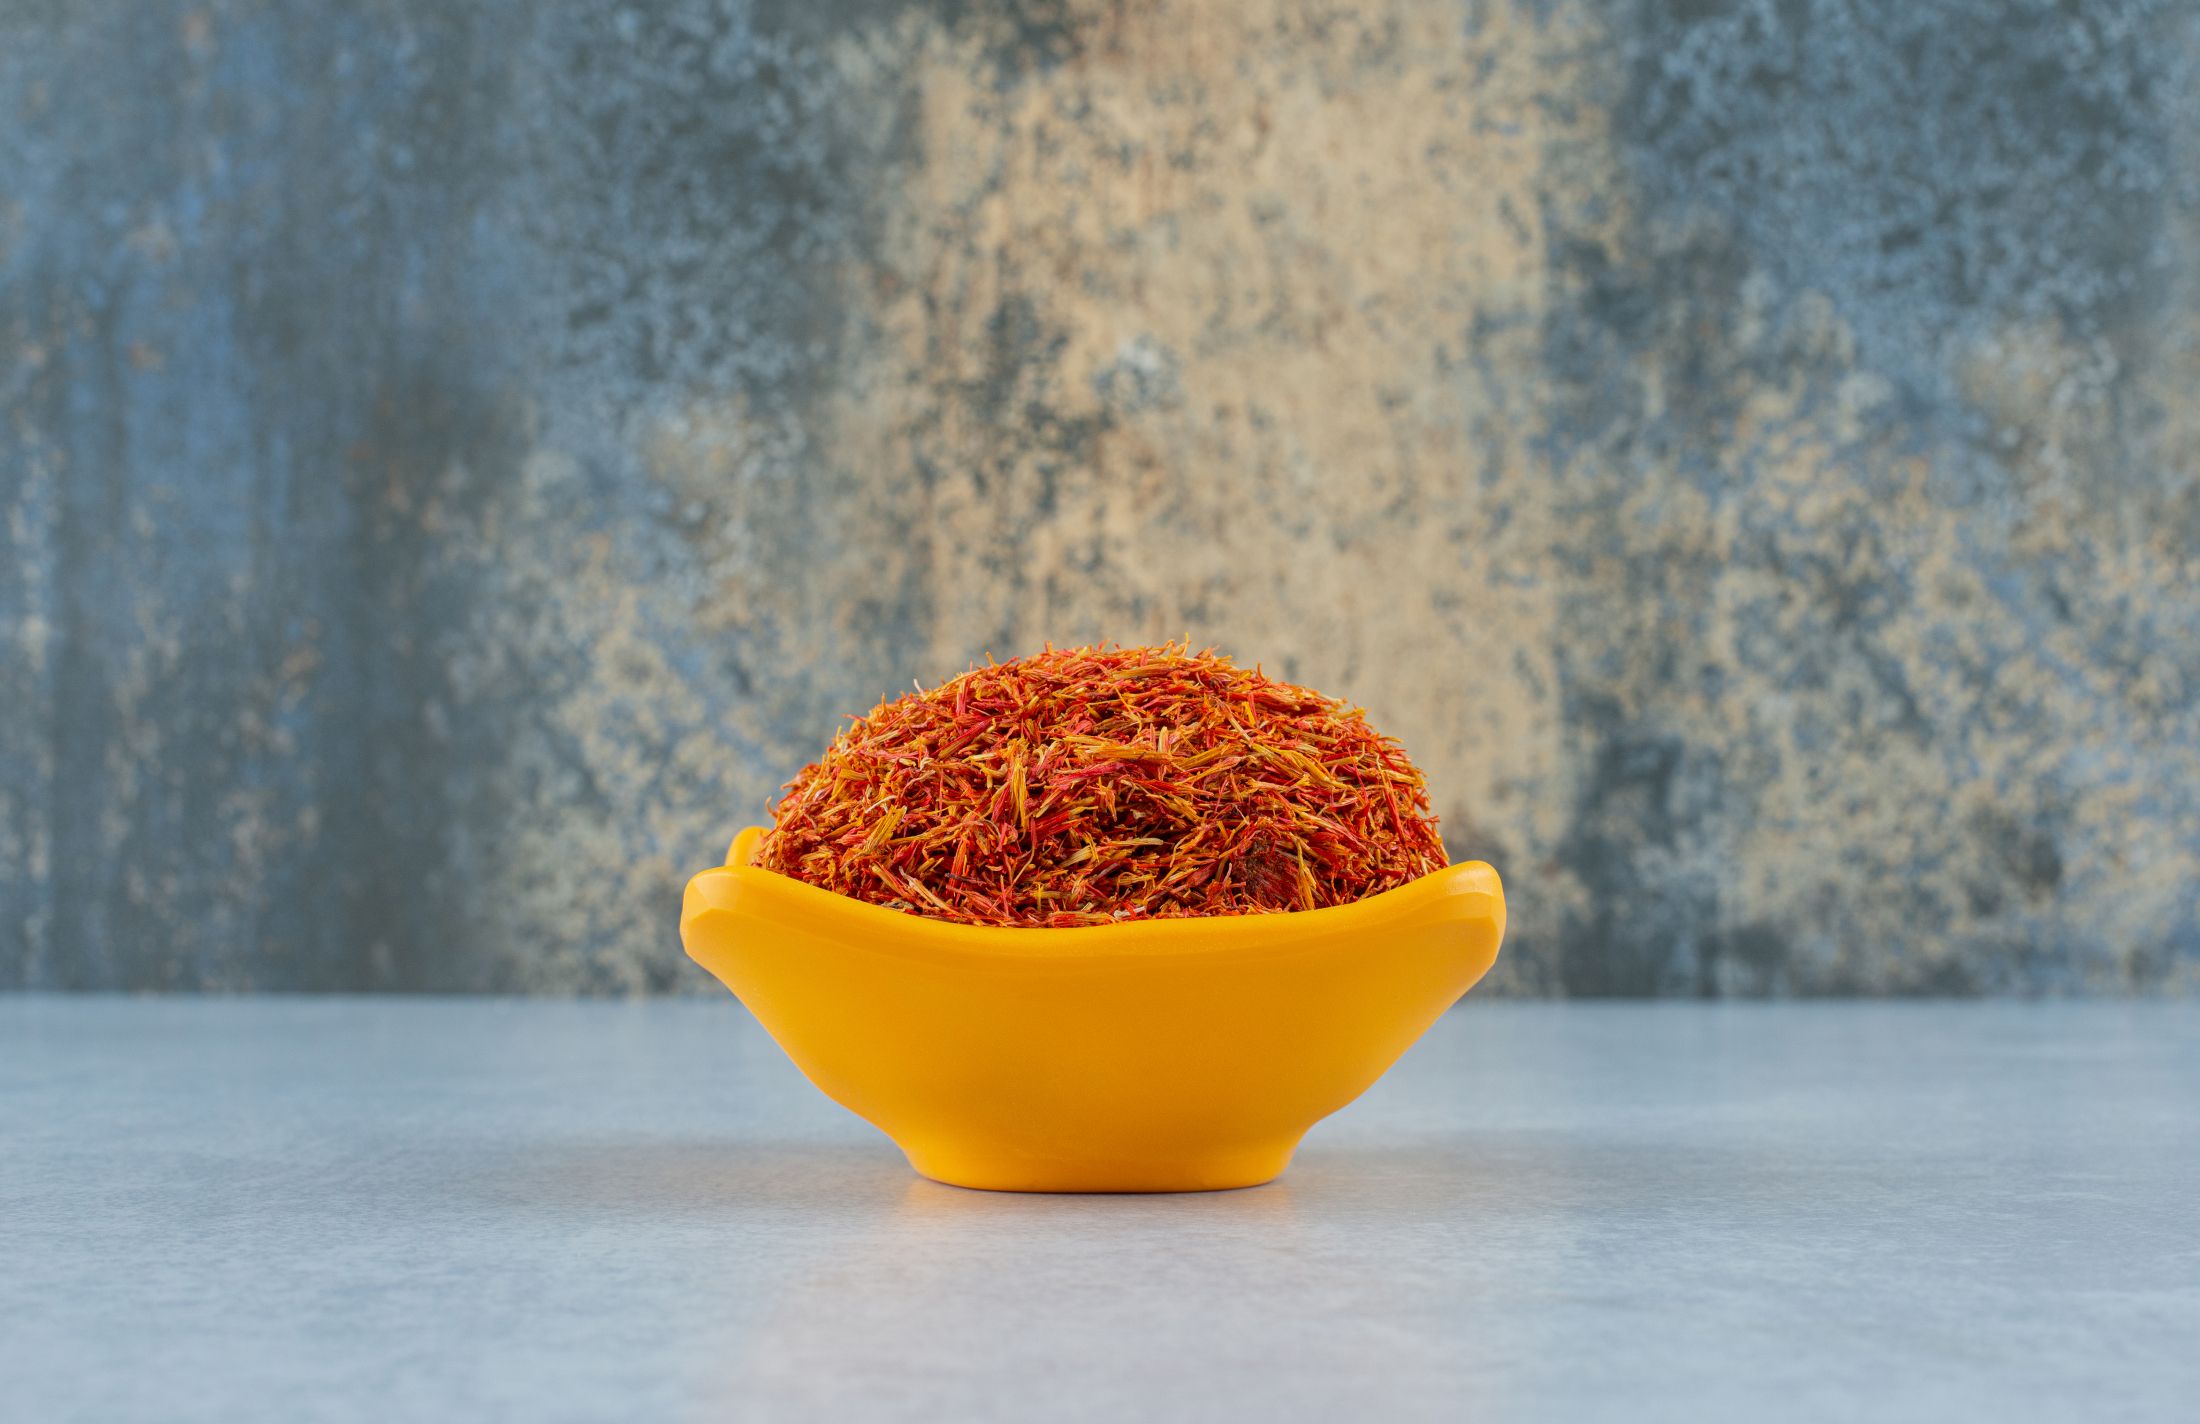 saffron-spices-in-a-yellow-ceramic-cup-on-blue-background-high-quality-photo.jpg